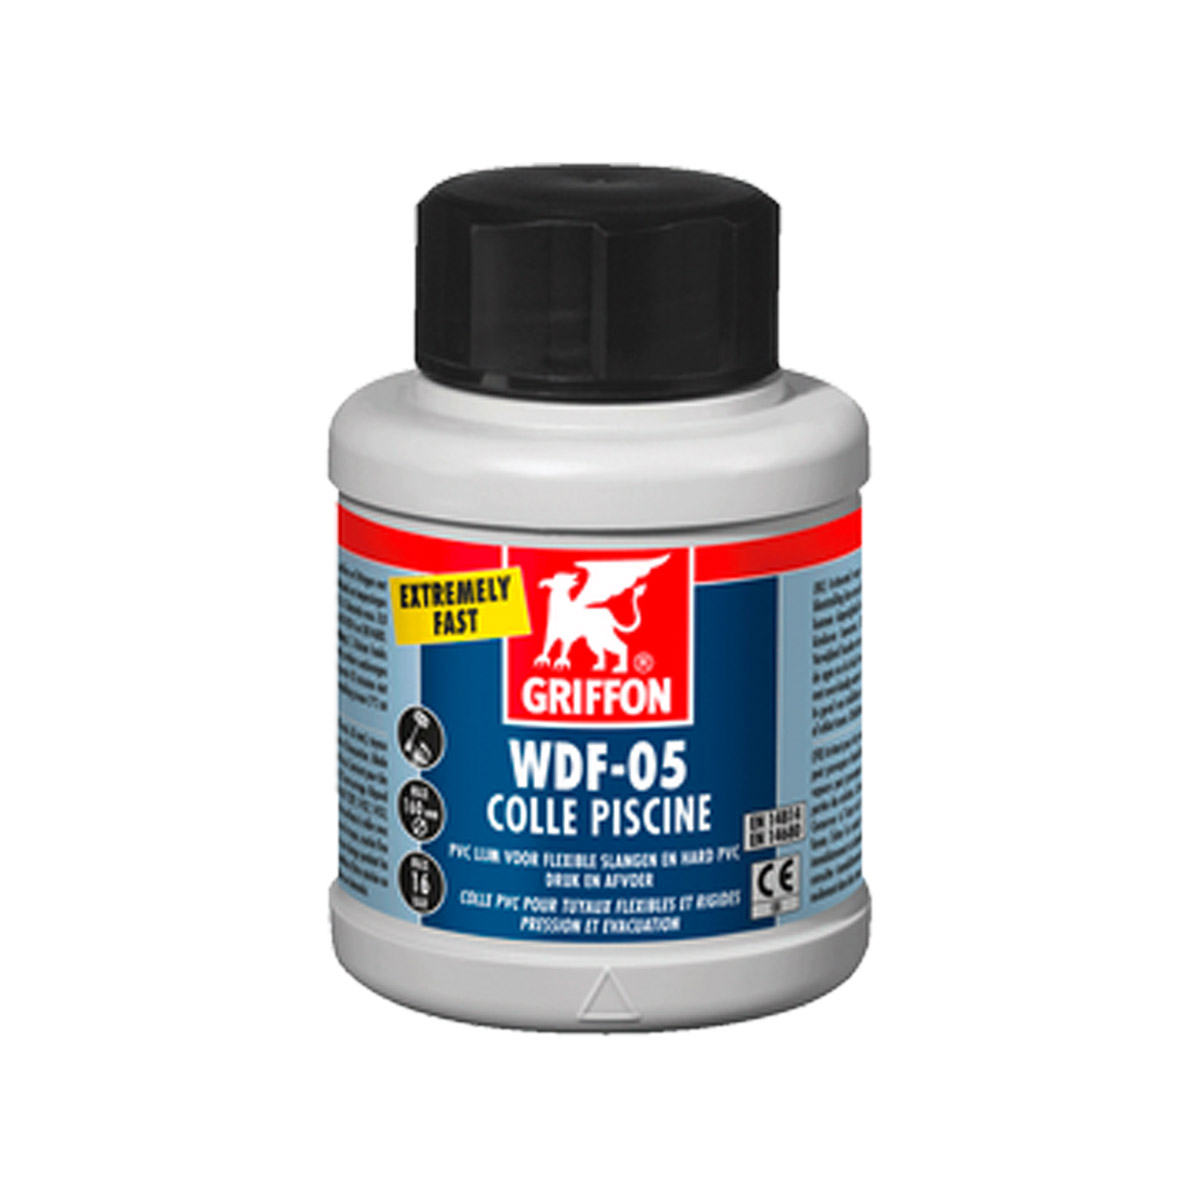 Solvent Cement GRIFFON WDF-05
500ml with brush Solvent Cement GRIFFON WDF-05
500ml with brush